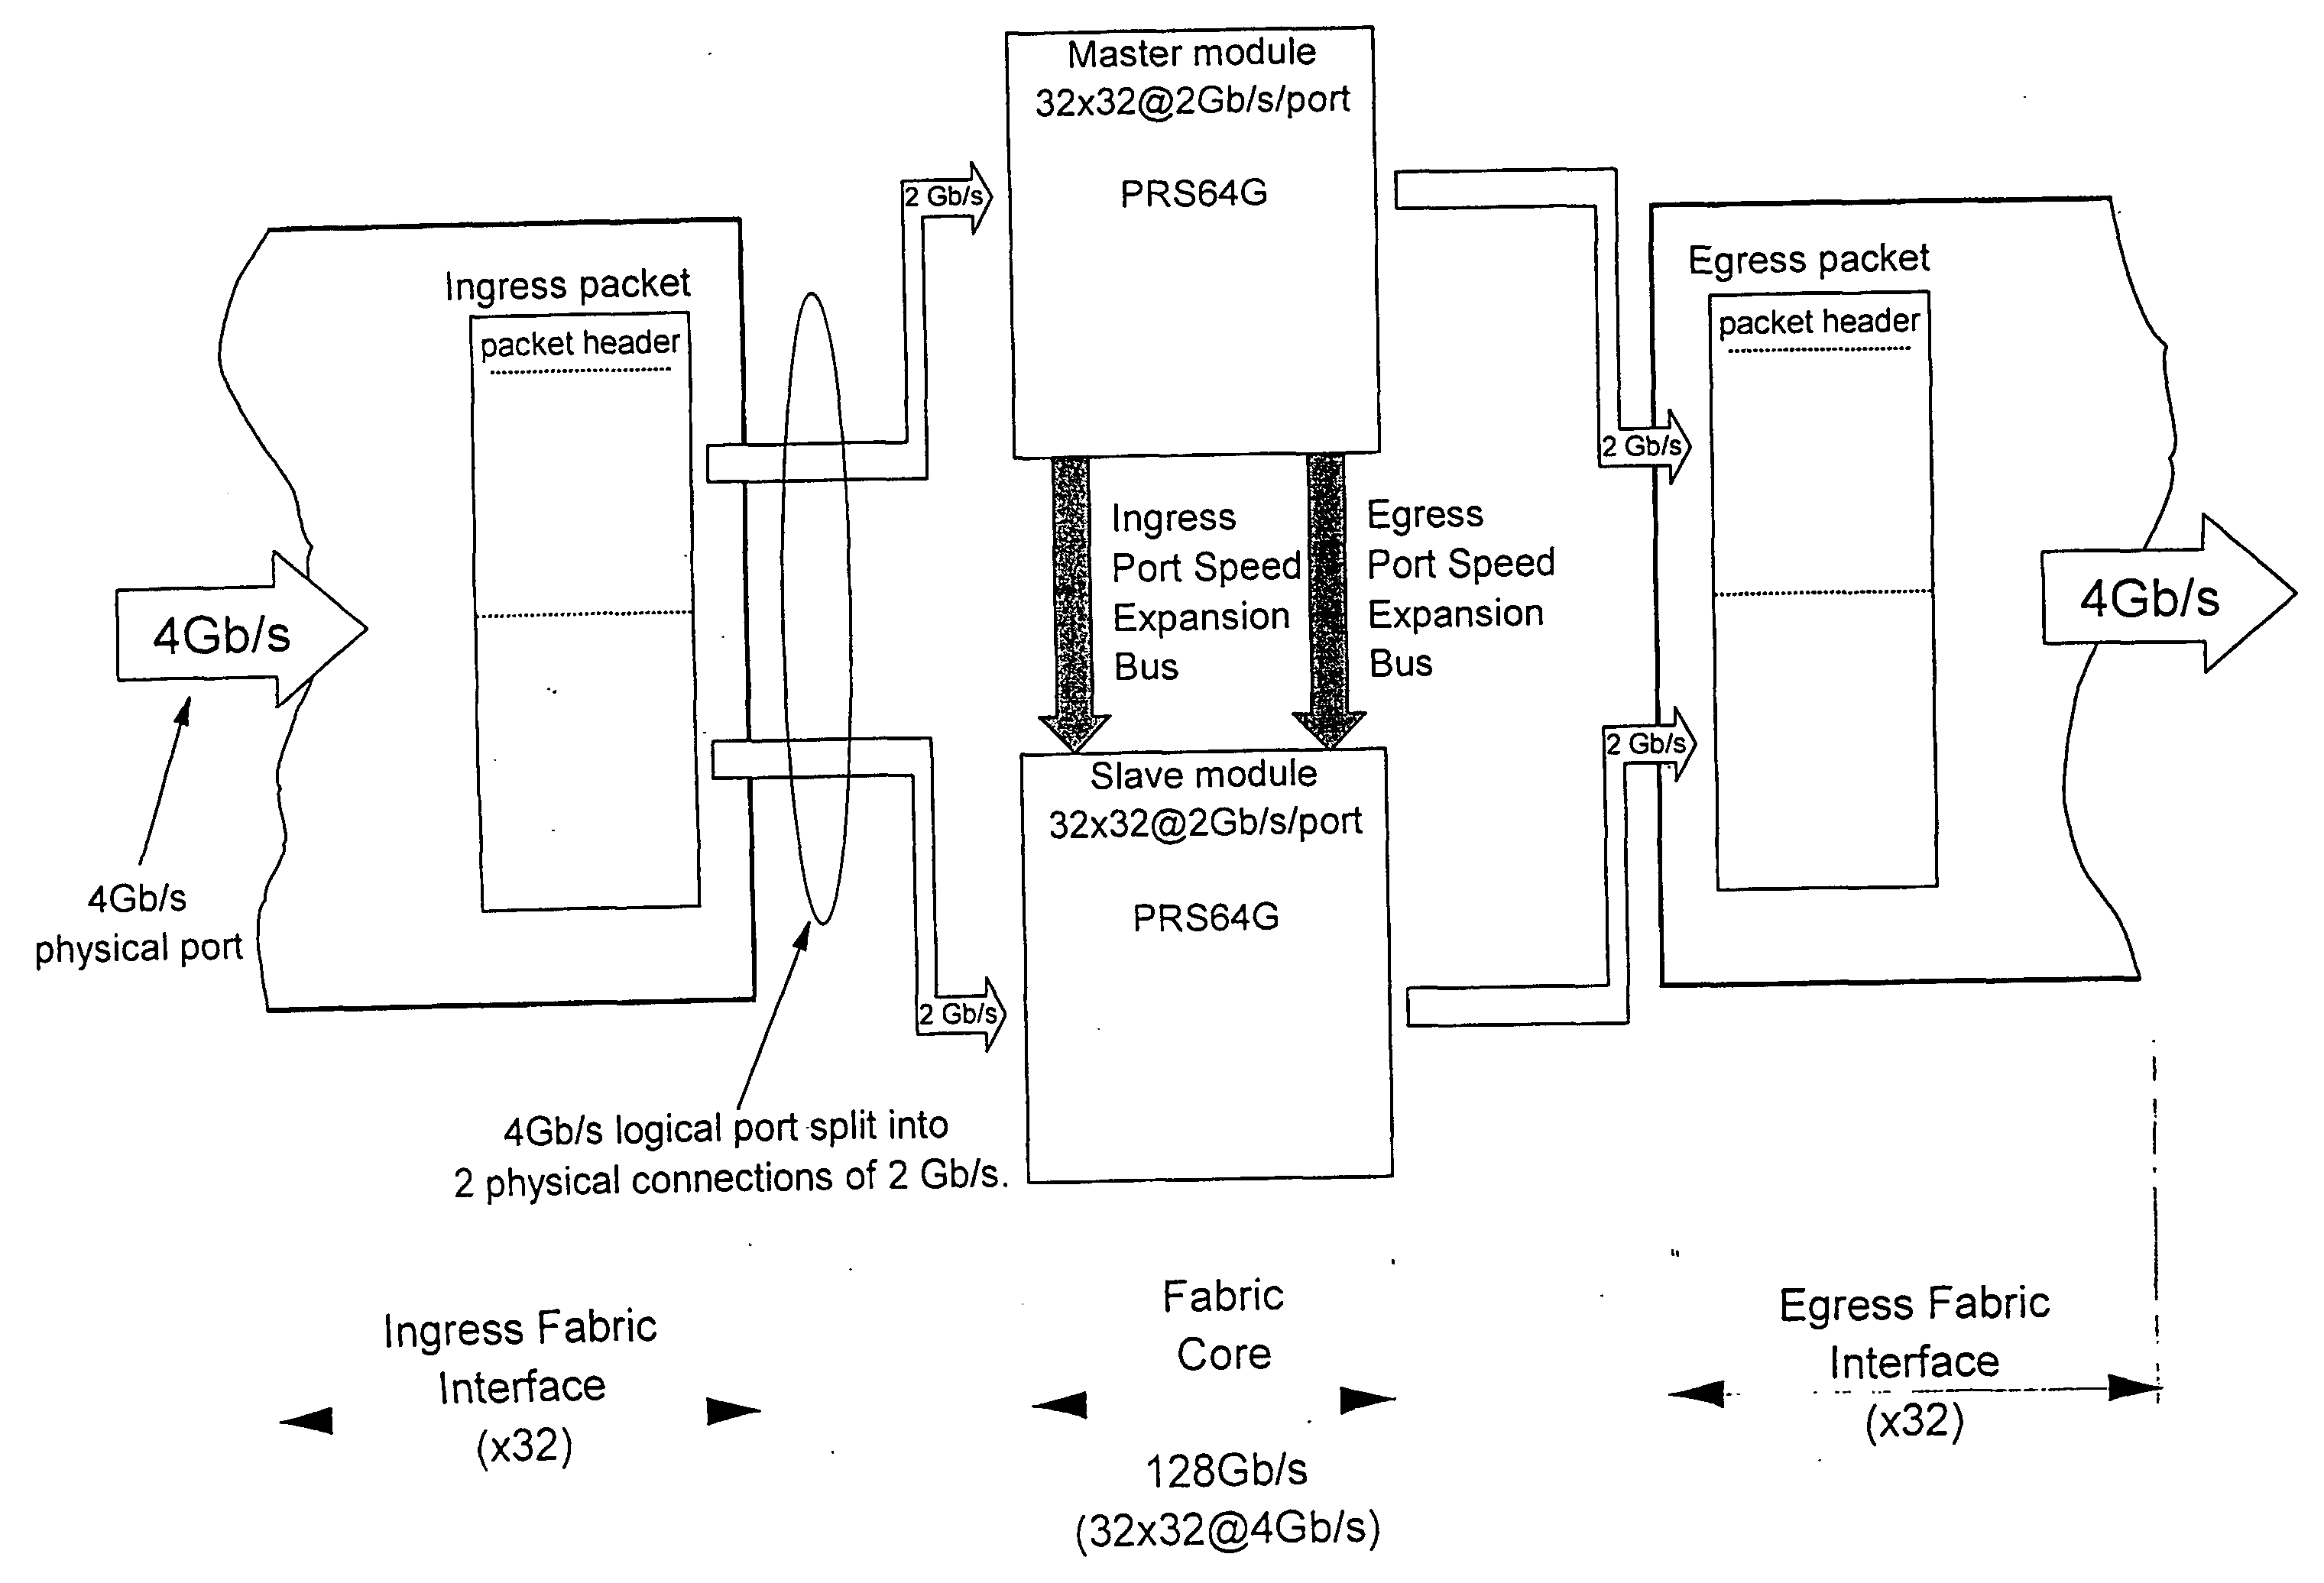 Method and arrangement for local sychronization in master-slave distributed communication systems